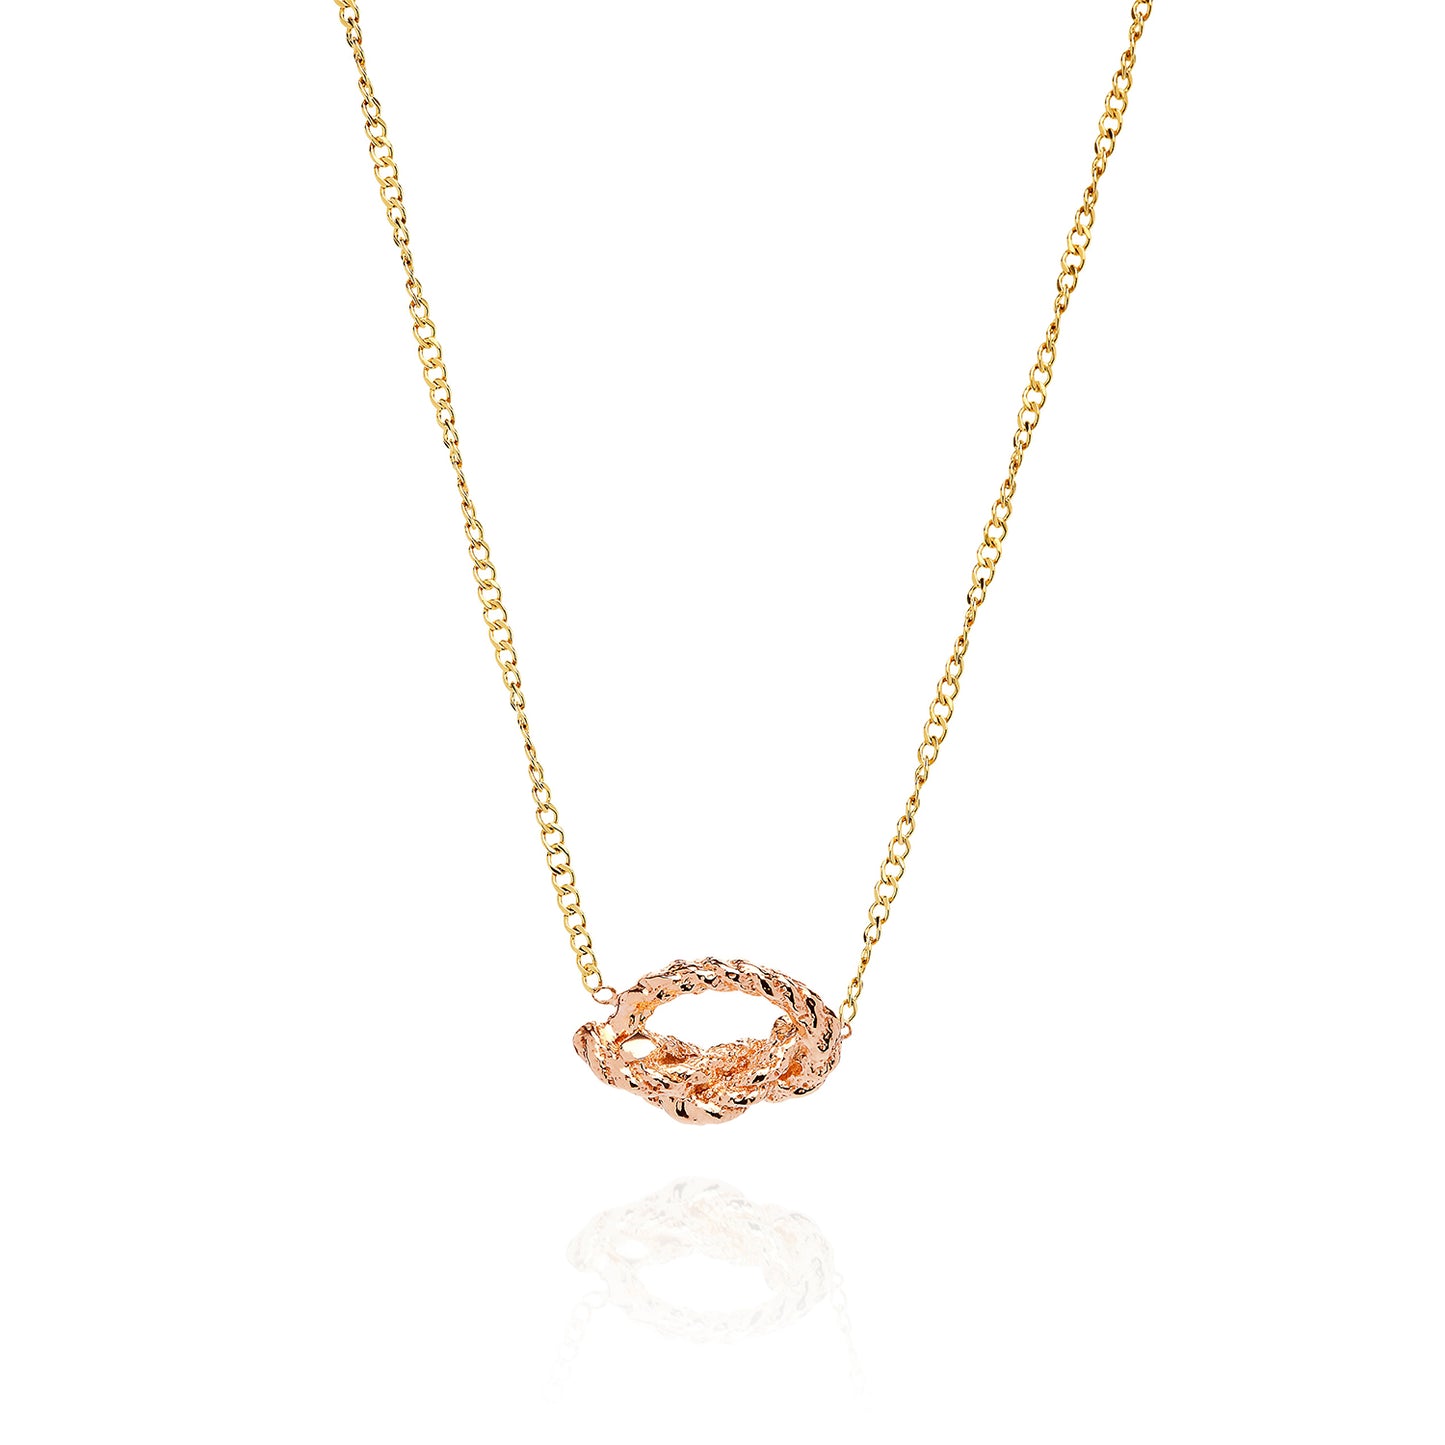 Kerry Huff Knot Necklace Kerry Huff 9ct rose gold Knot on a 9ct yellow gold chain Necklace.